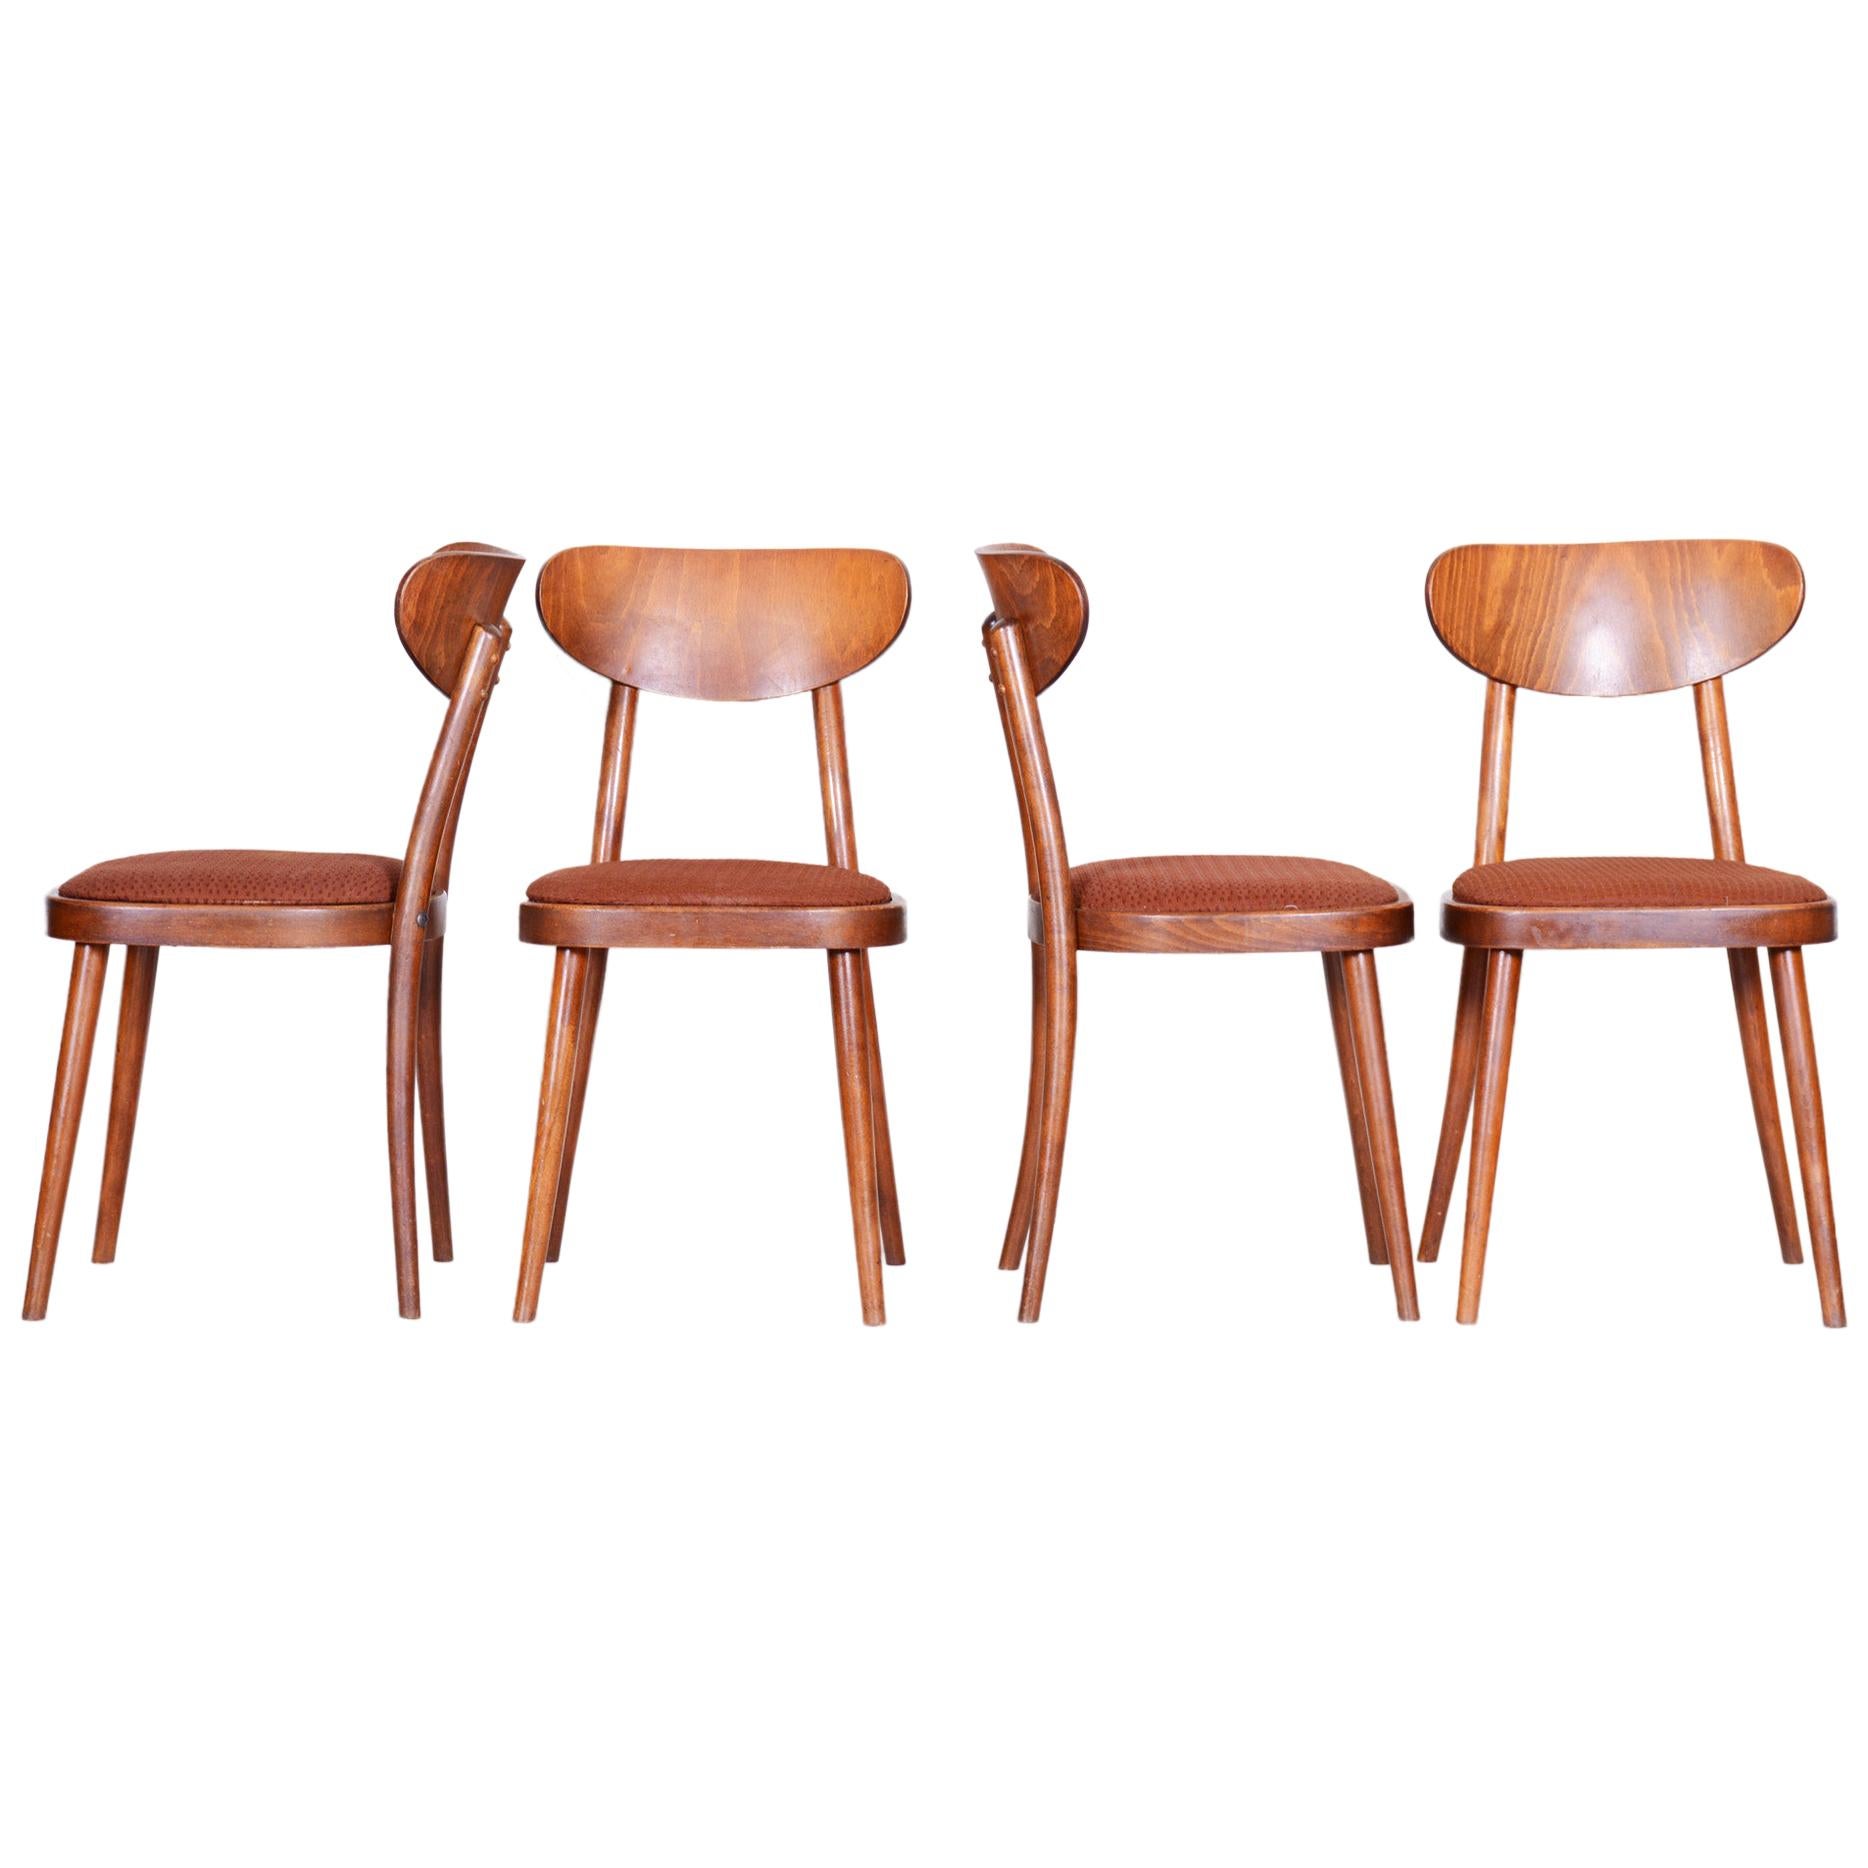 Czech Brown Beech Midcentury Chairs, 4 Pieces, 1940s, Well Preserved Condition